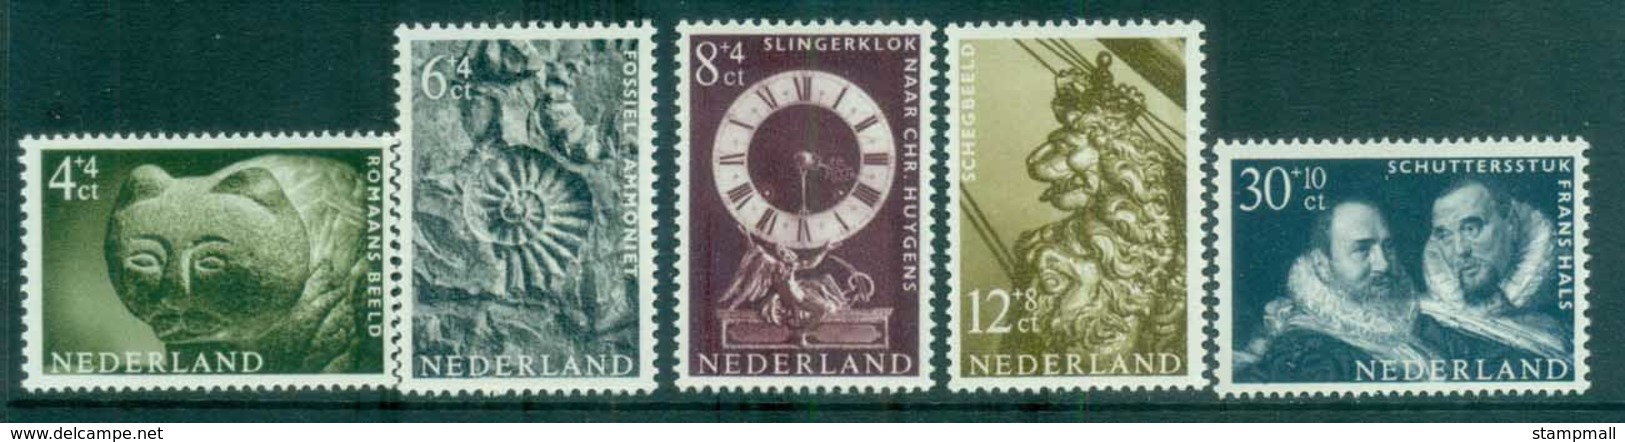 Netherlands 1962 Charity, Social & Cultural Purposes, Museum Experts MLH Lot76521 - Unclassified